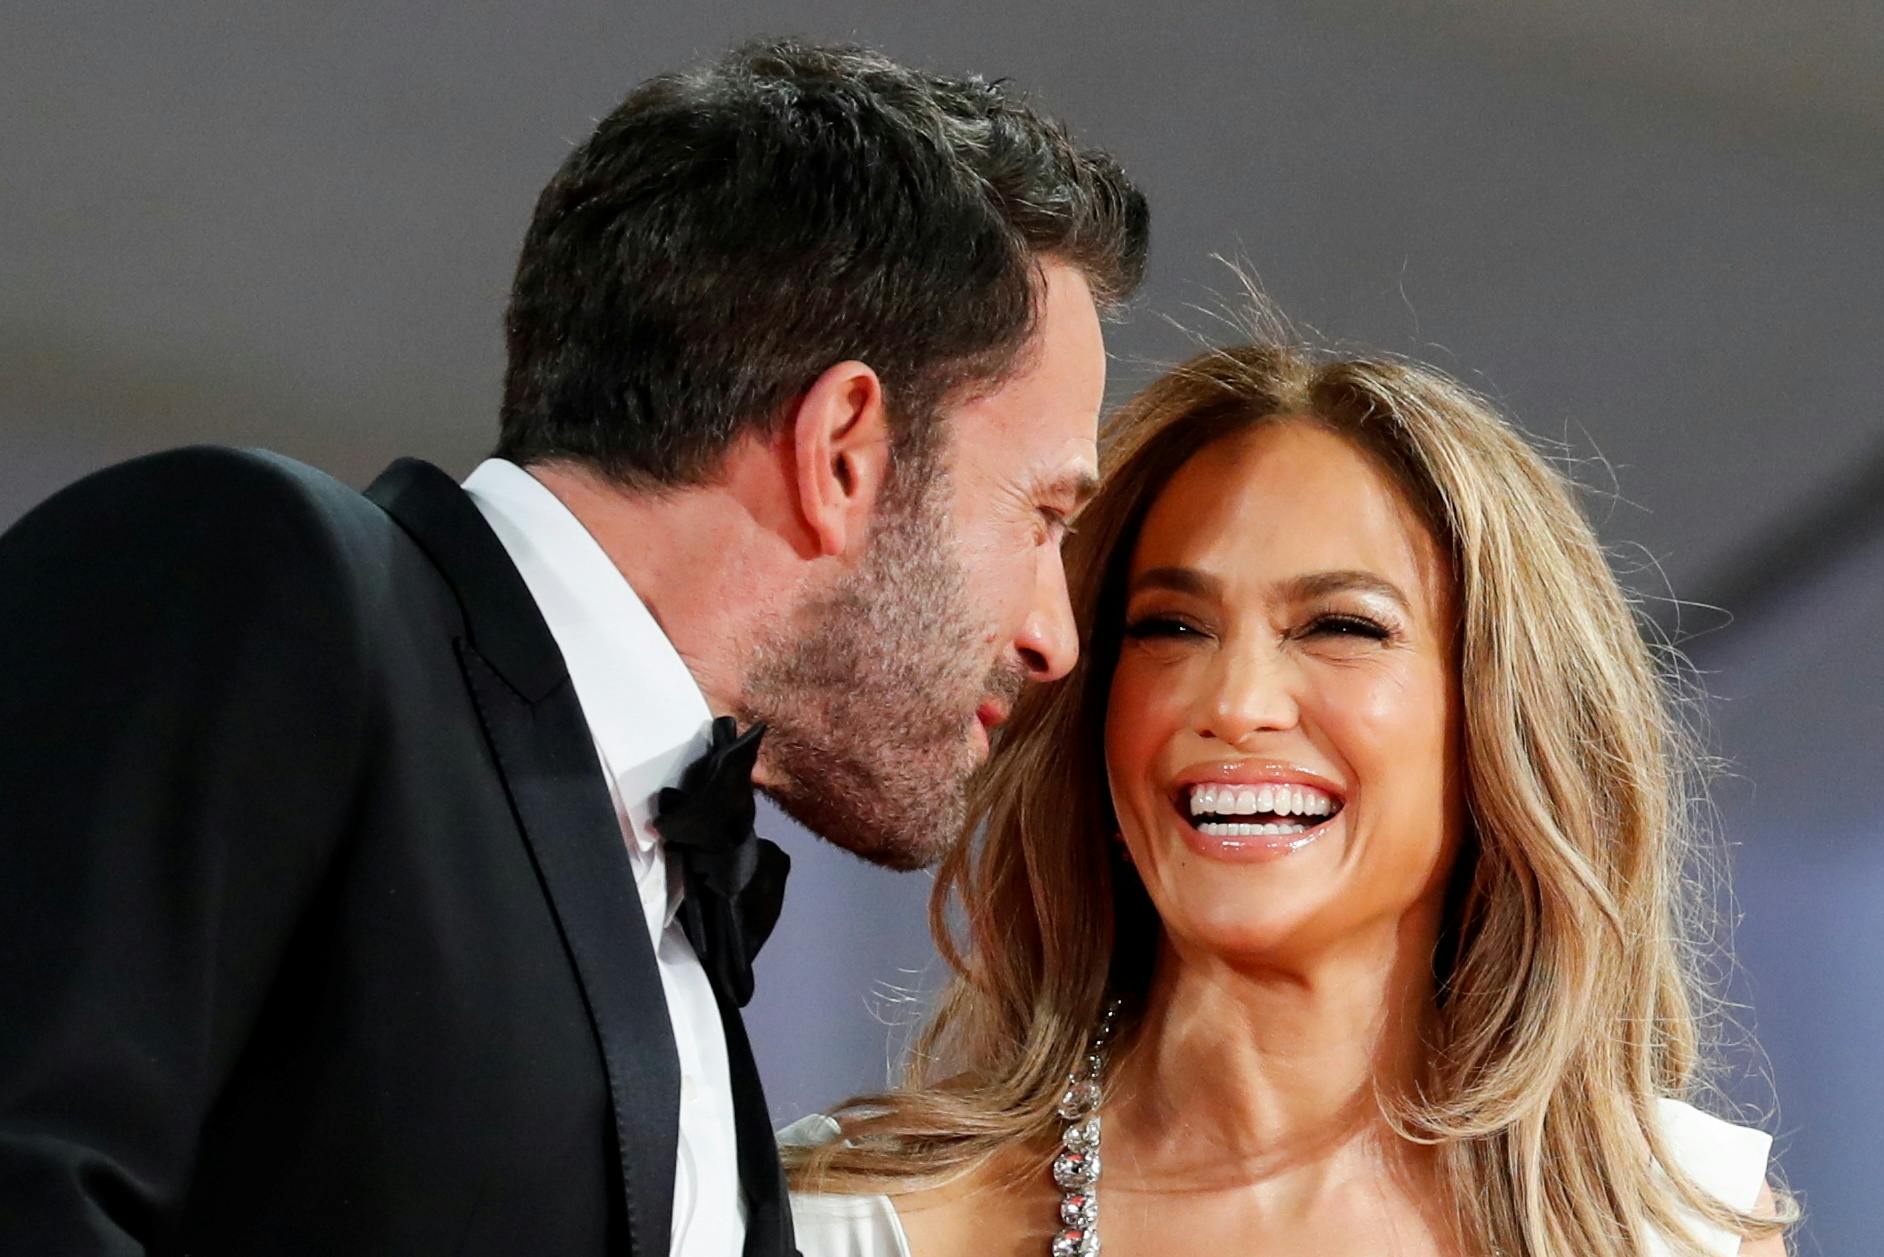 The 78th Venice Film Festival - Premiere screening of the film "The Last Duel" - Out of competition - Venice, Italy, September 10, 2021. Jennifer Lopez and Ben Affleck pose. REUTERS/Yara Nardi